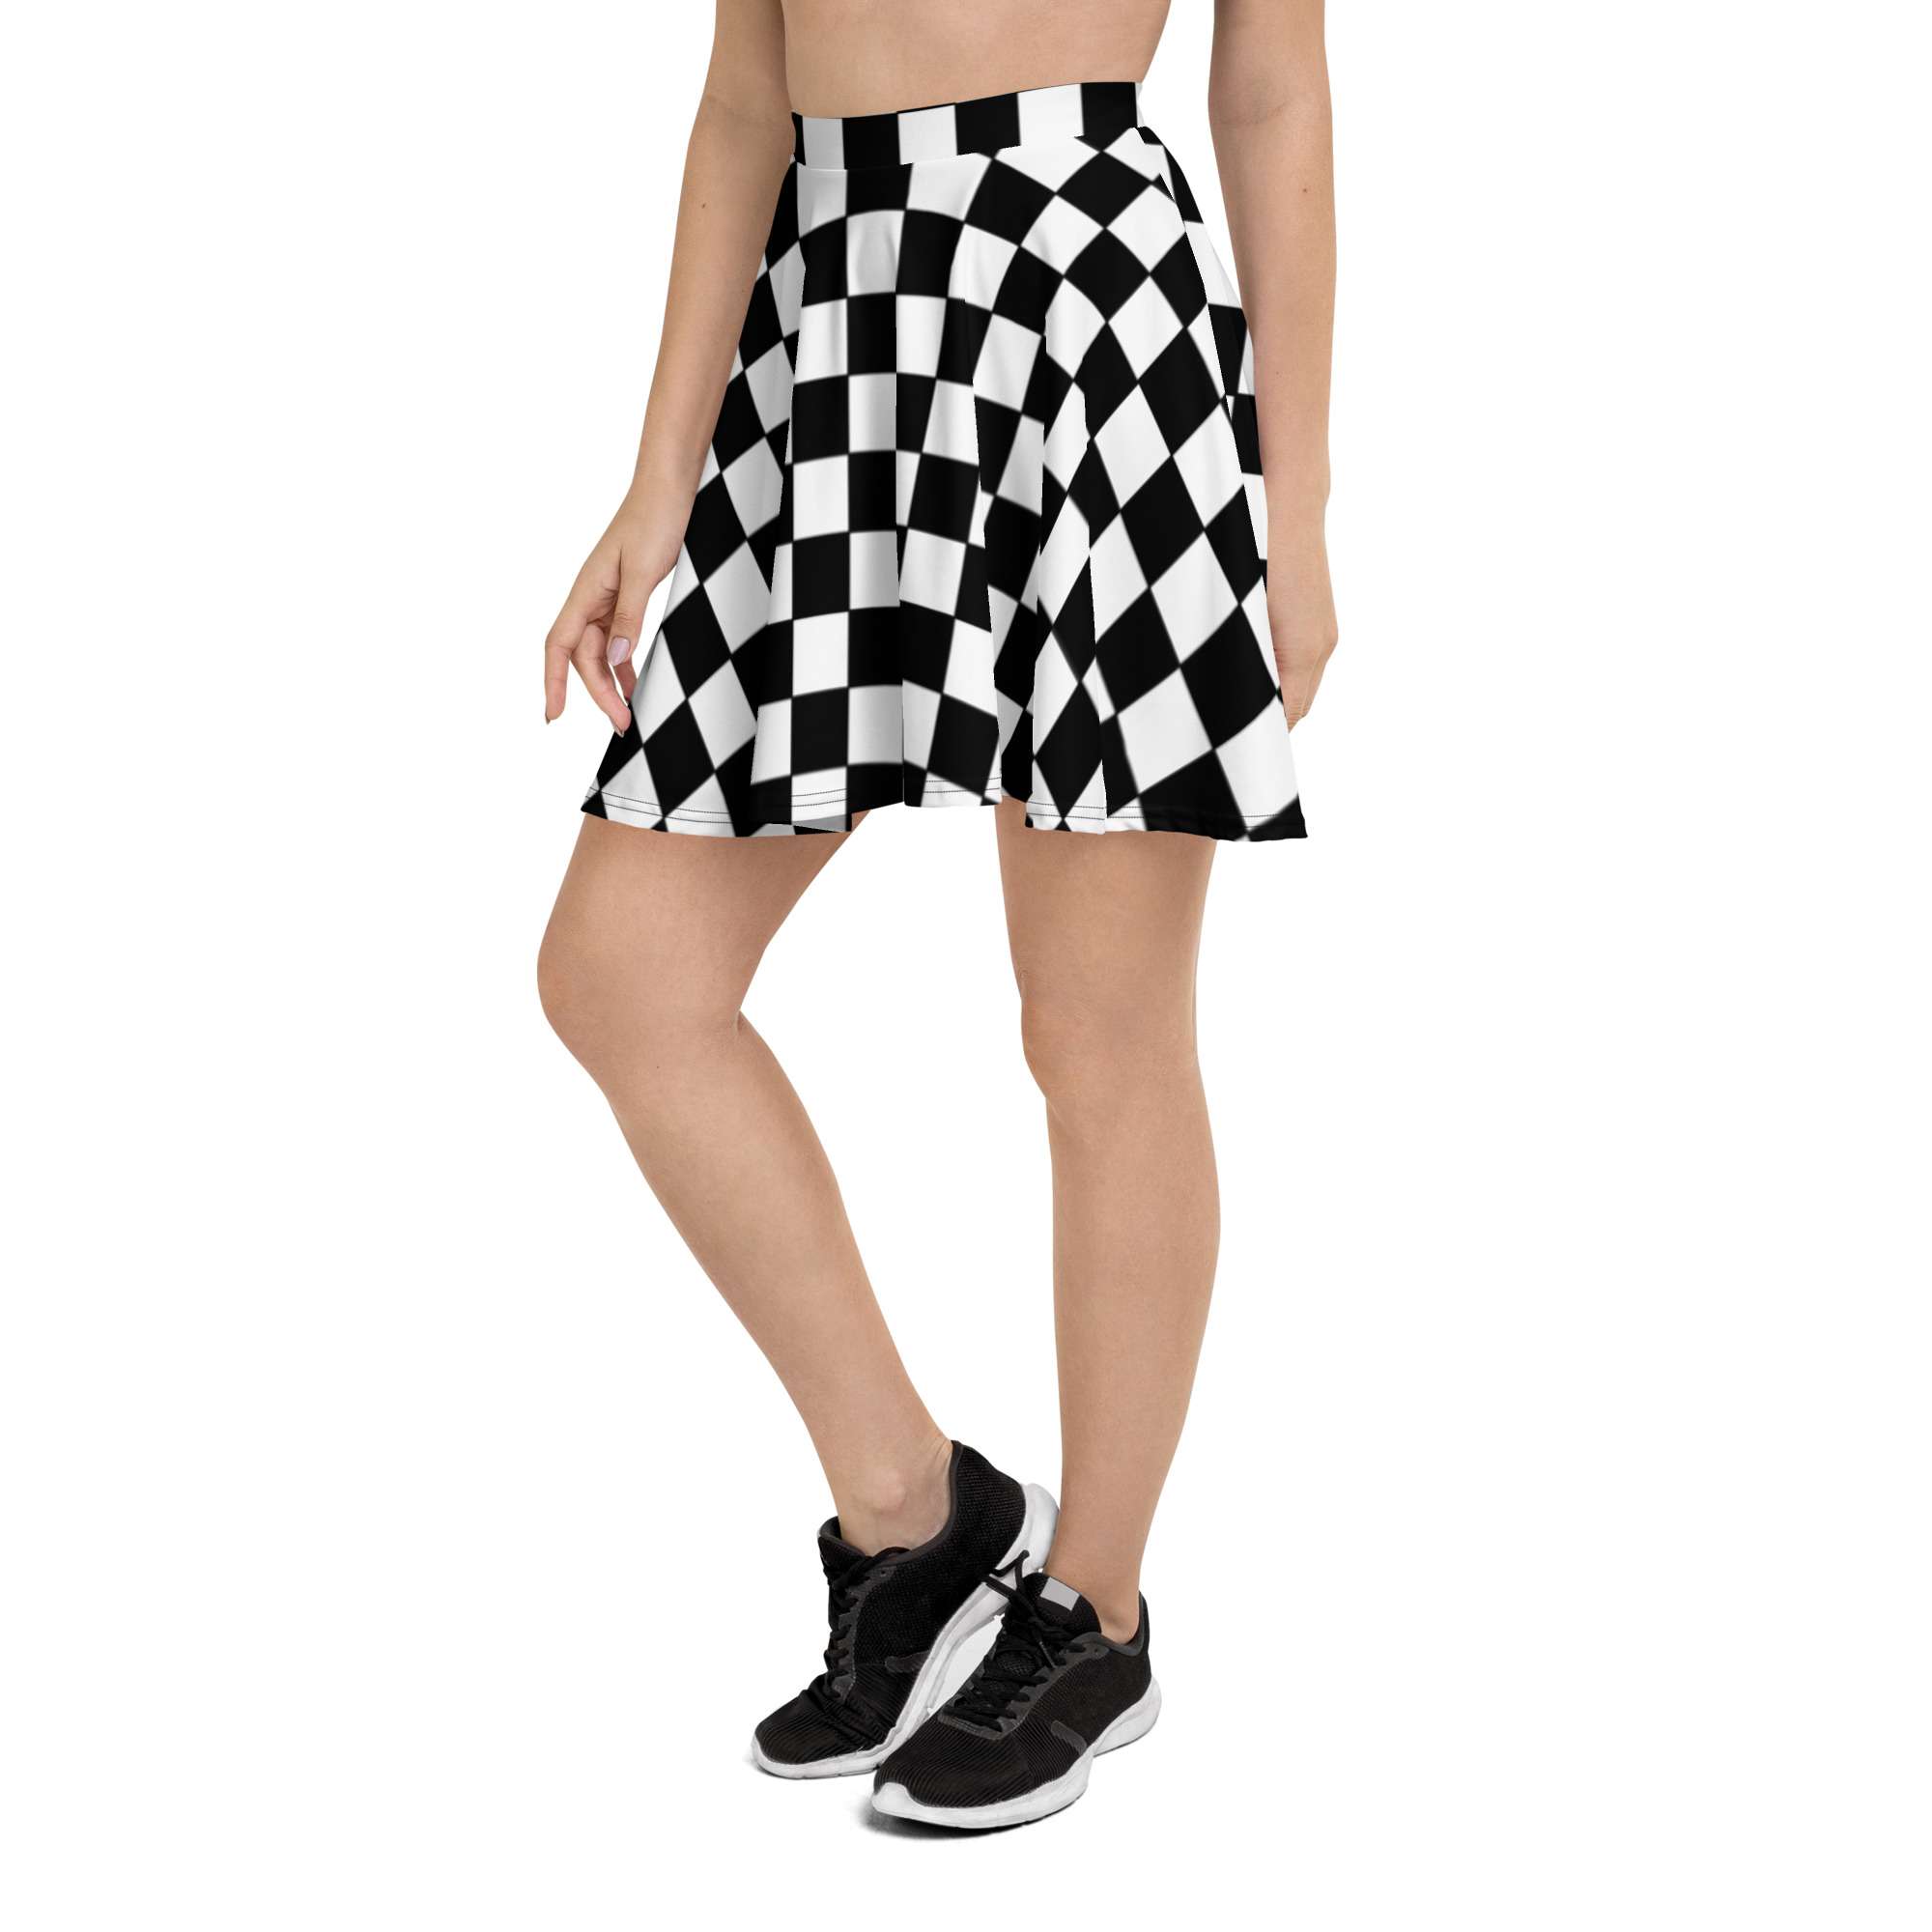 Reggae Ska Skater Skirt side left view in black and white chequerboard pattern. Make a statement with clothing from Rastaseed.com online Reggae gear.